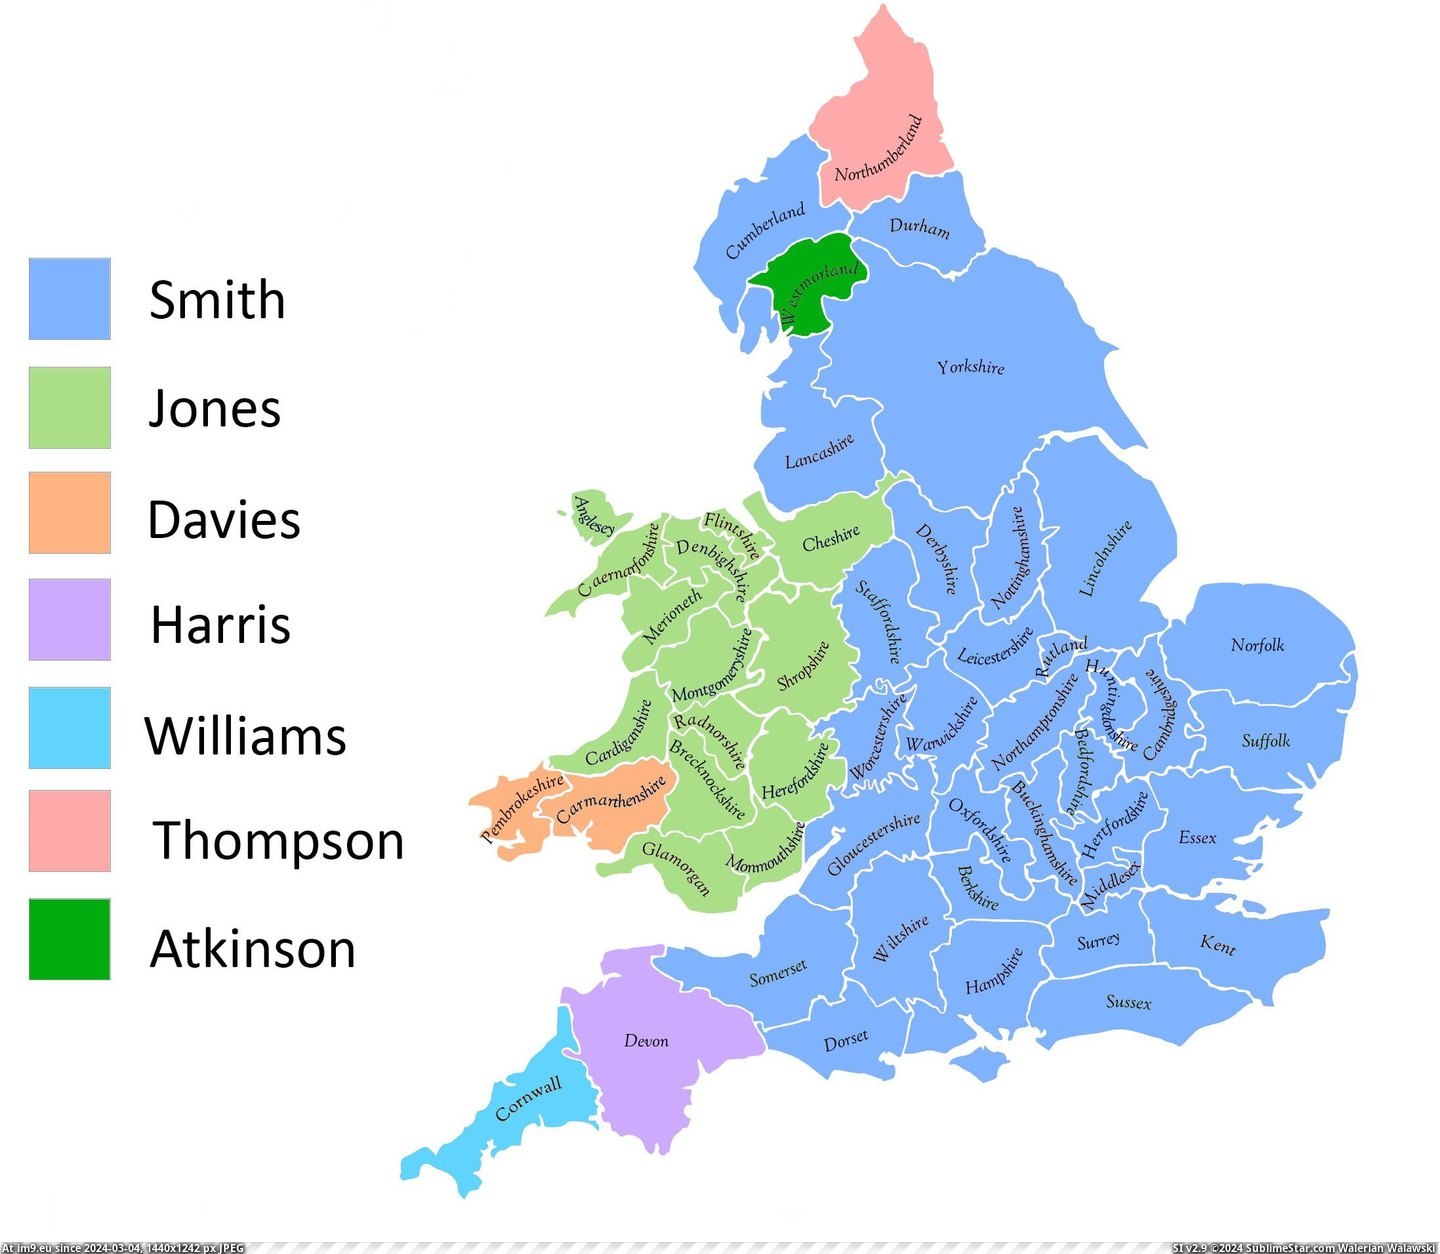 #England #Common #Surnames #905px #Wales #Census [Mapporn] Most common surnames in England & Wales from the 1881 census. [2,195px × 1,905px] Pic. (Image of album My r/MAPS favs))